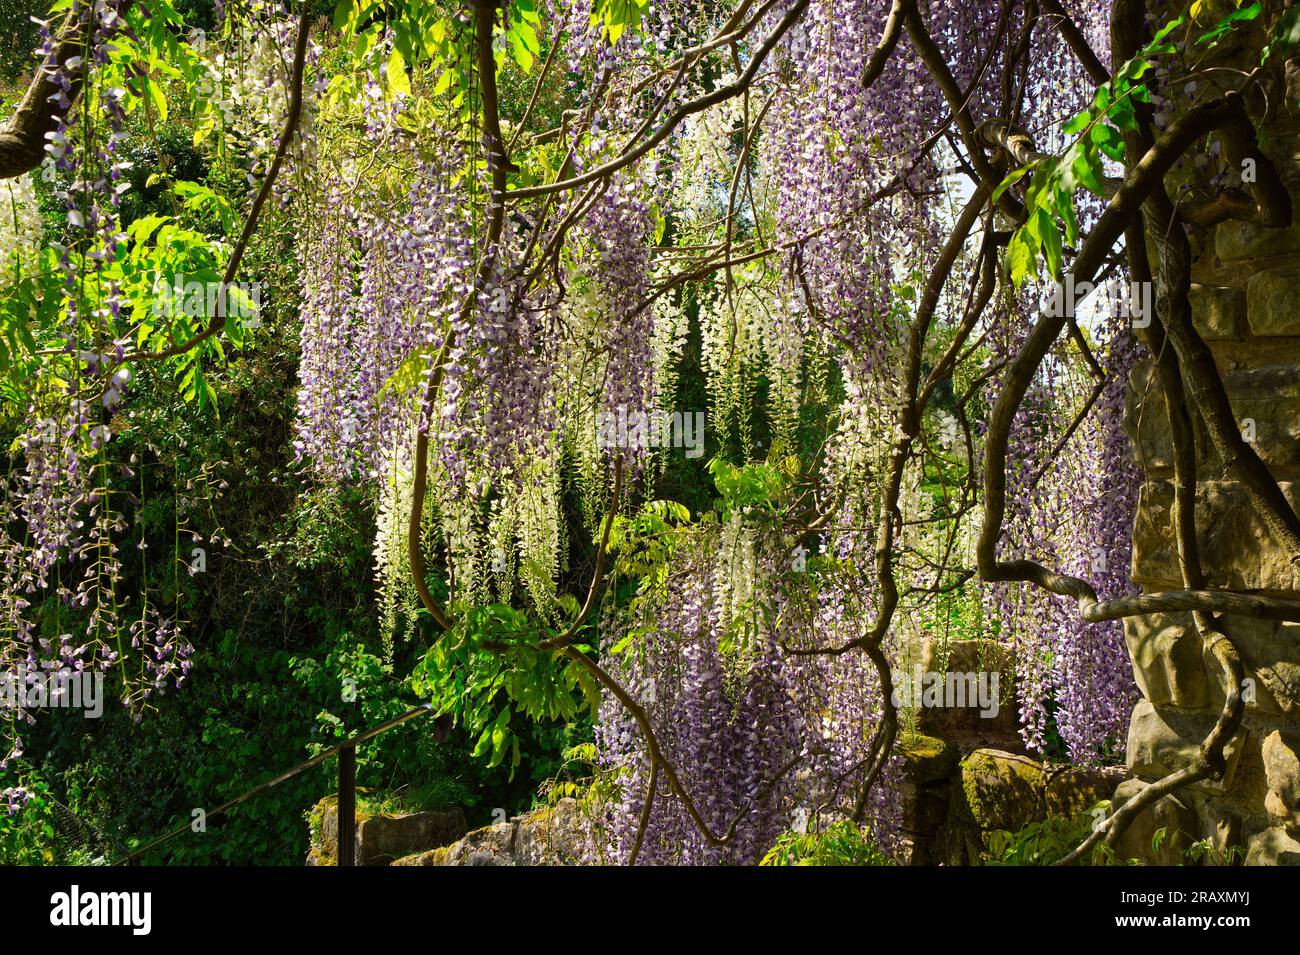 Wisteria plant in full bloom with the sun shining through from behind. Stock Photo